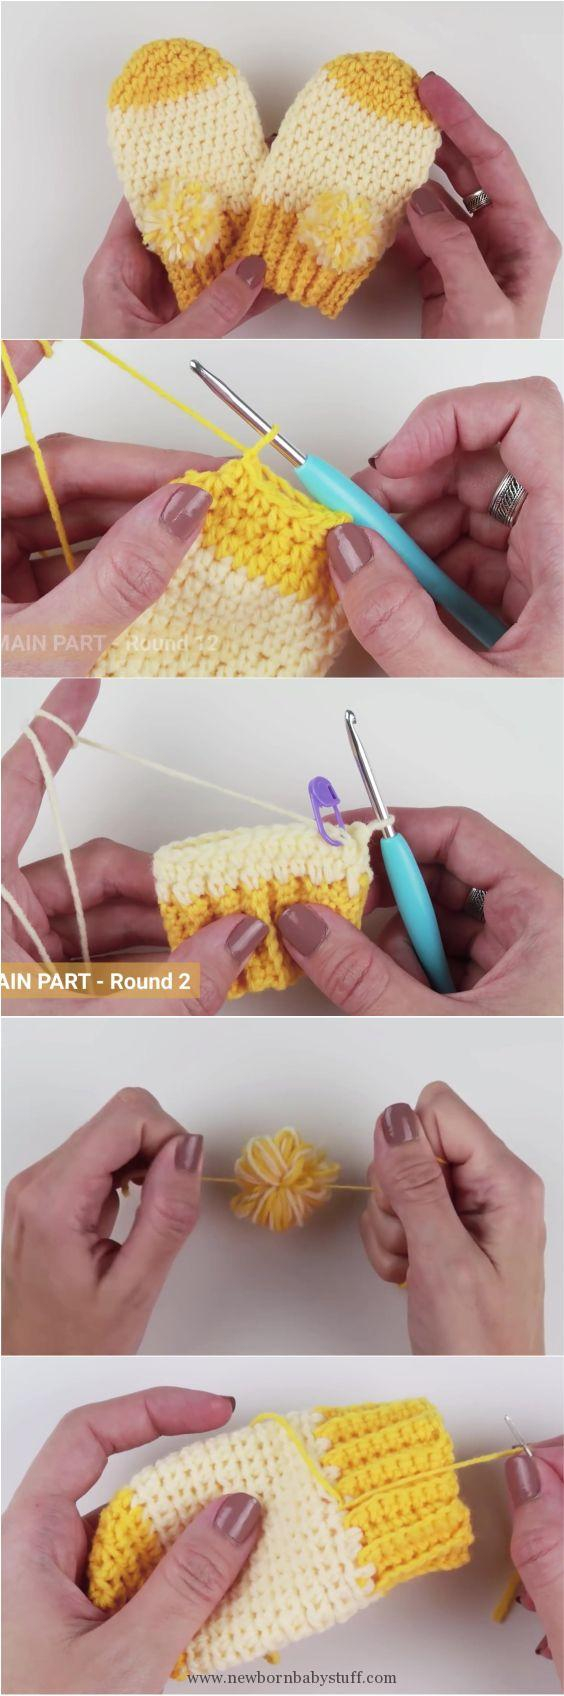 Fast Knitting Patterns Ba Knitting Patterns How To Crochet Fast And Easy Crochet Ba